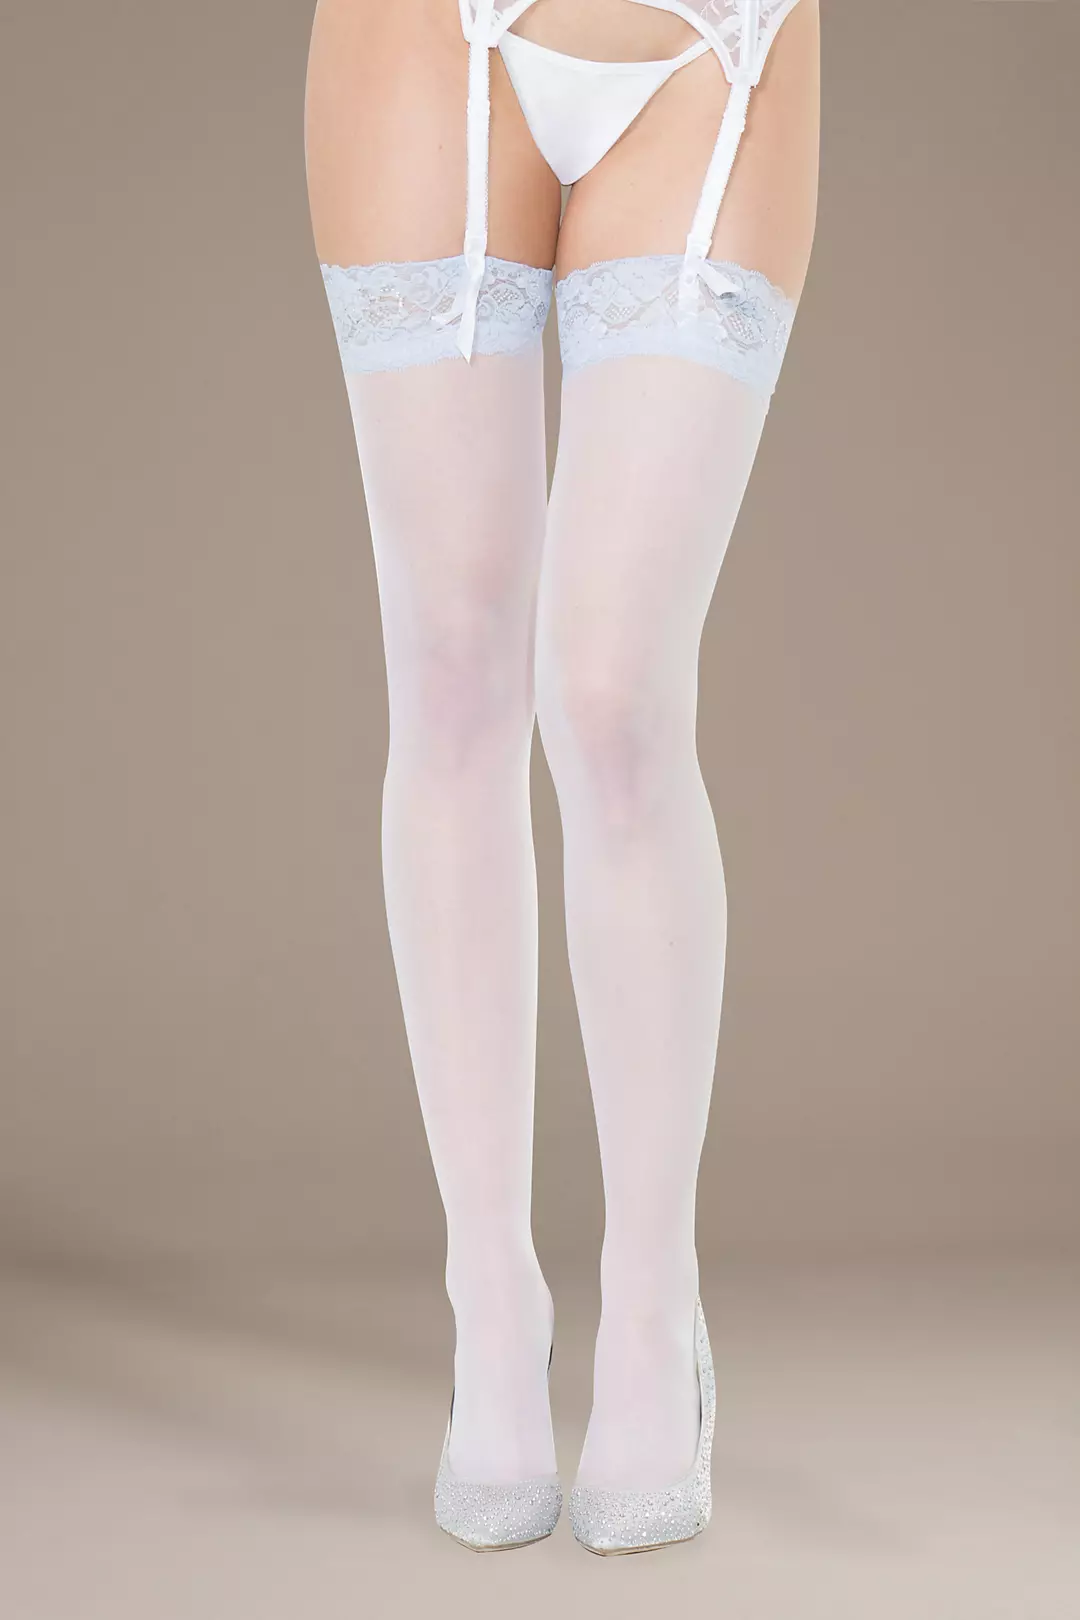 Coquette I Do Thigh Highs Image